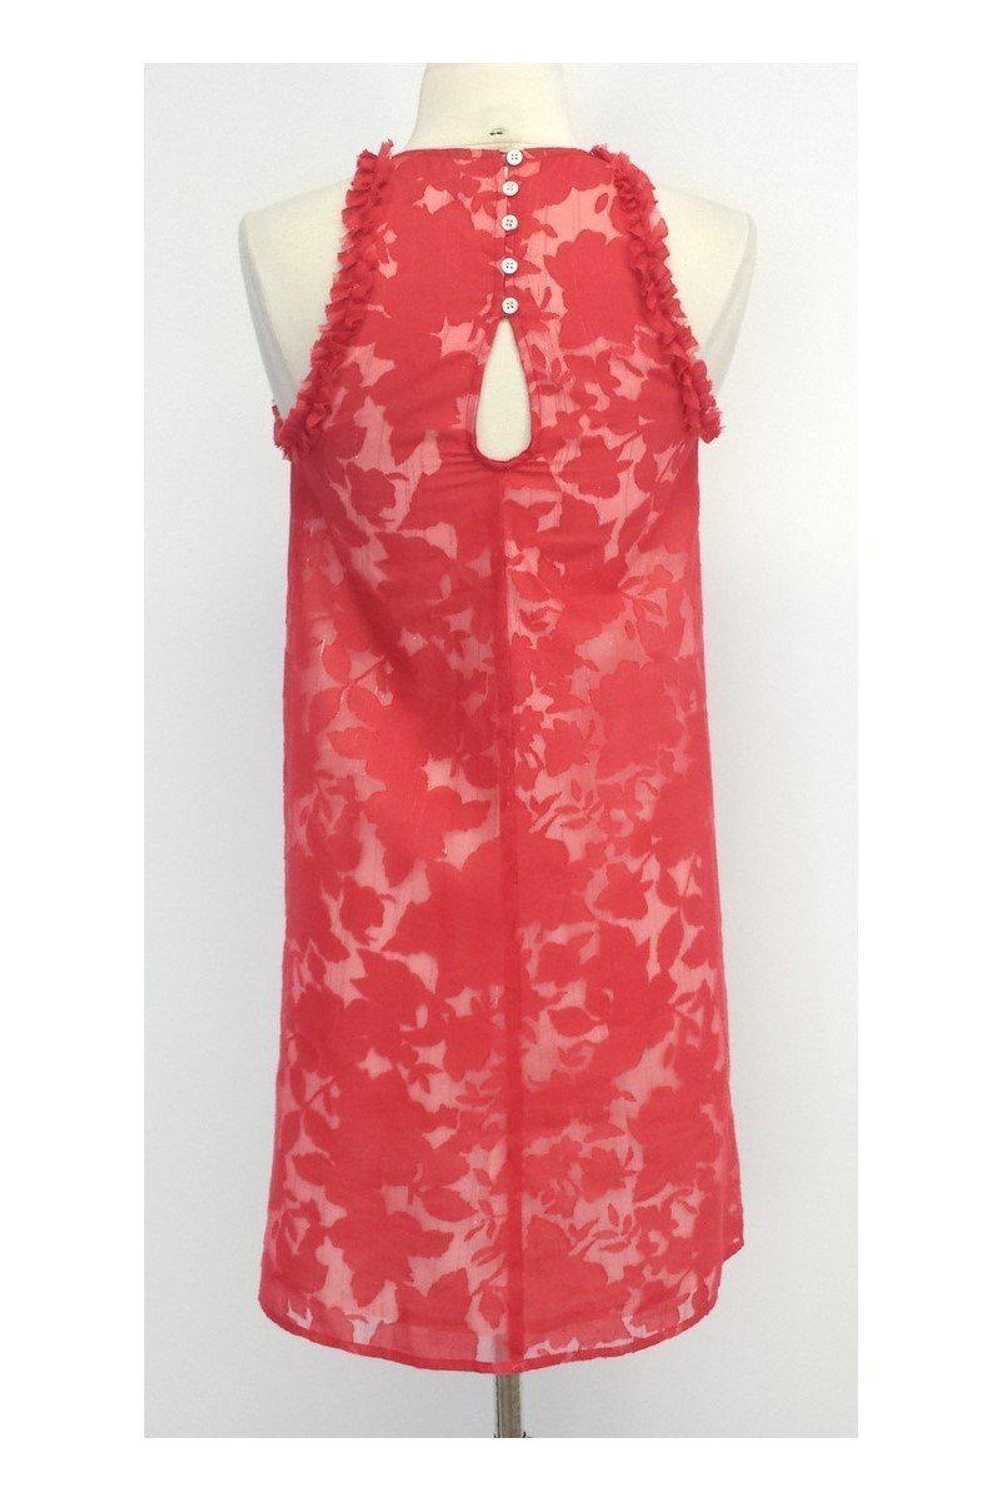 Christopher Deane - Red Floral Print Lace Dress S… - image 3